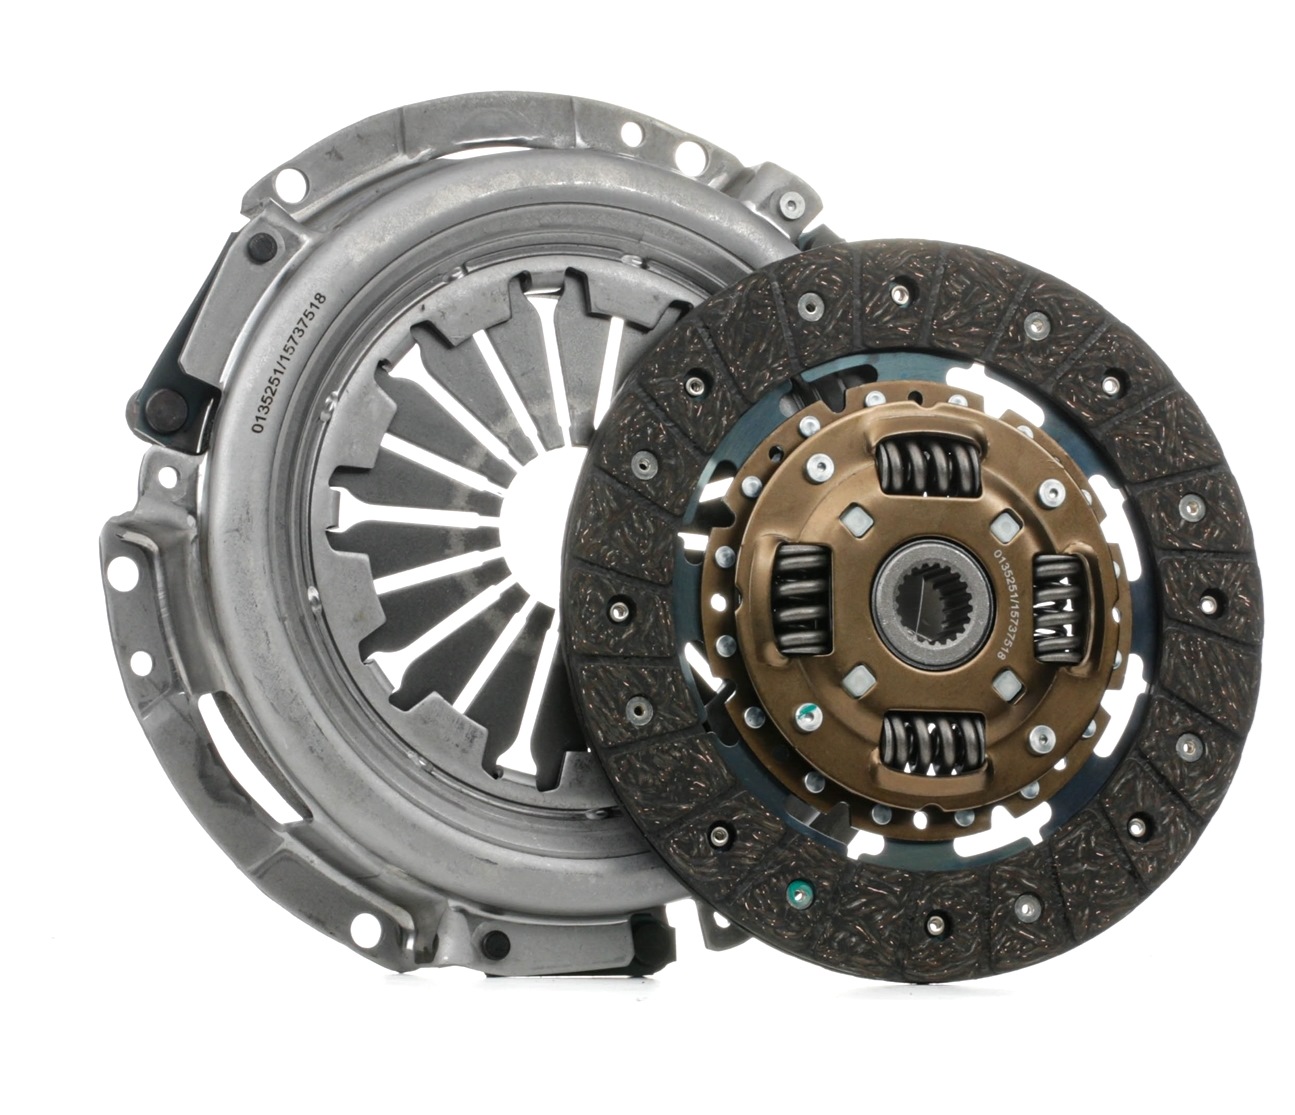 STARK SKCK-0100795 Clutch kit with clutch release bearing, with clutch disc, 200mm